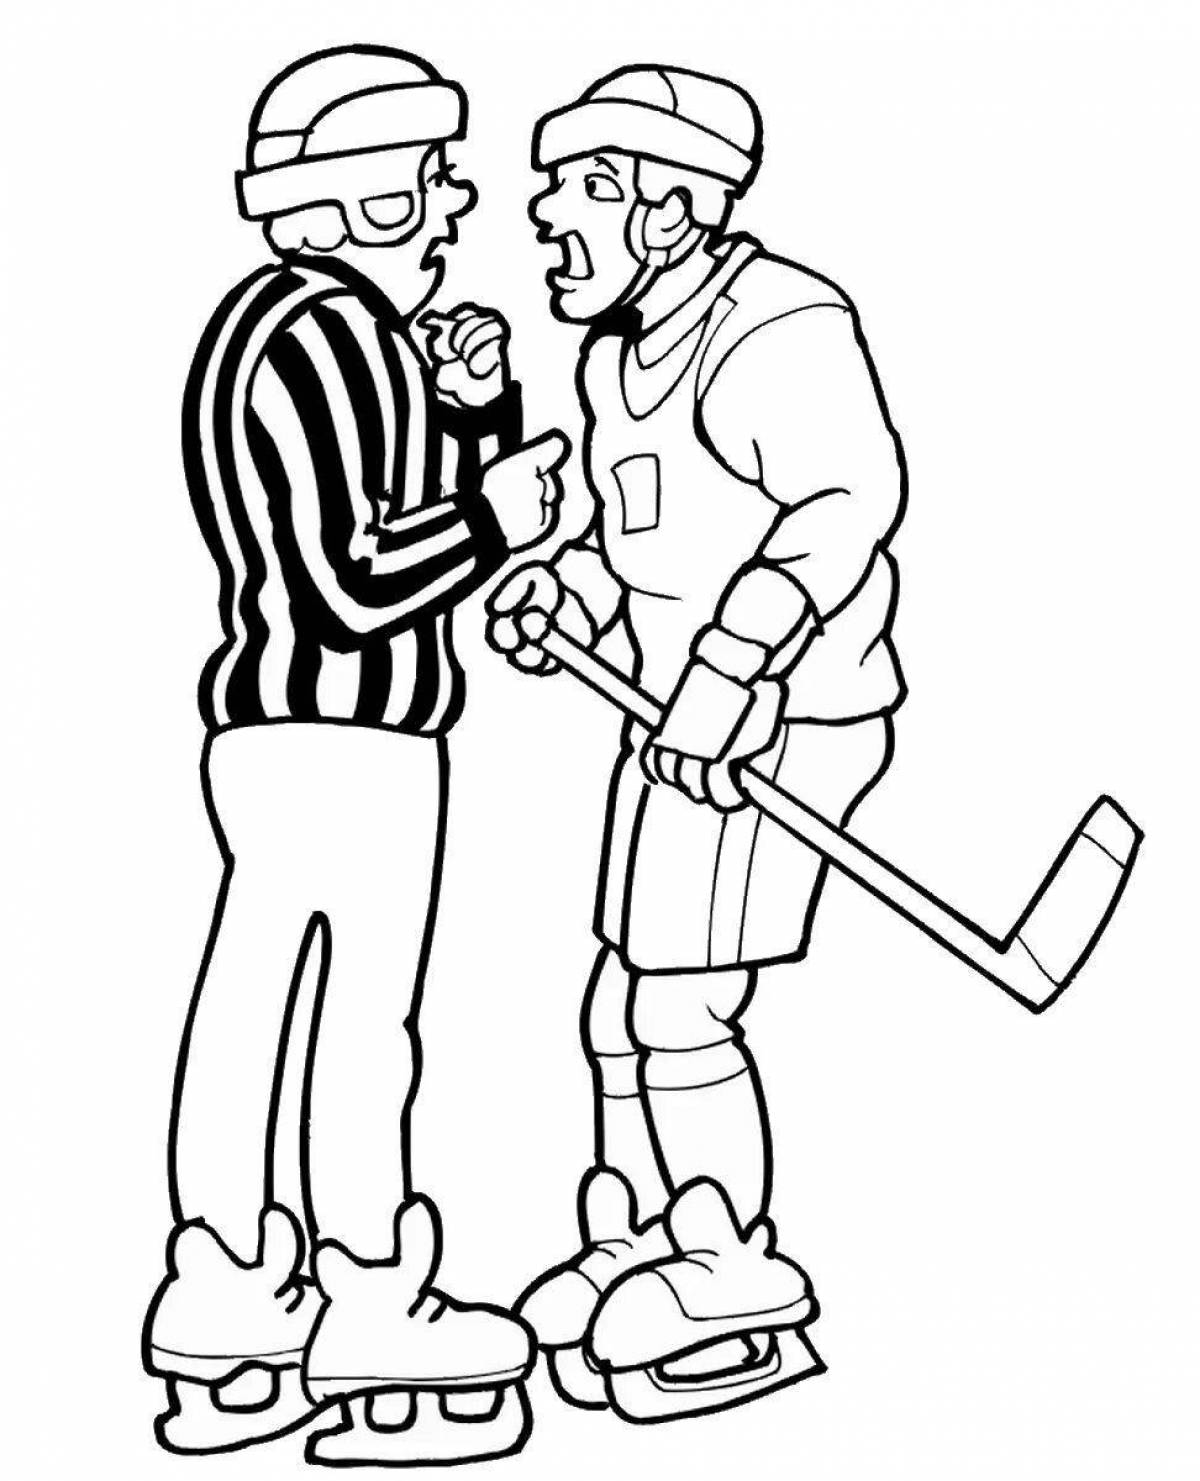 Sweet hockey coloring page